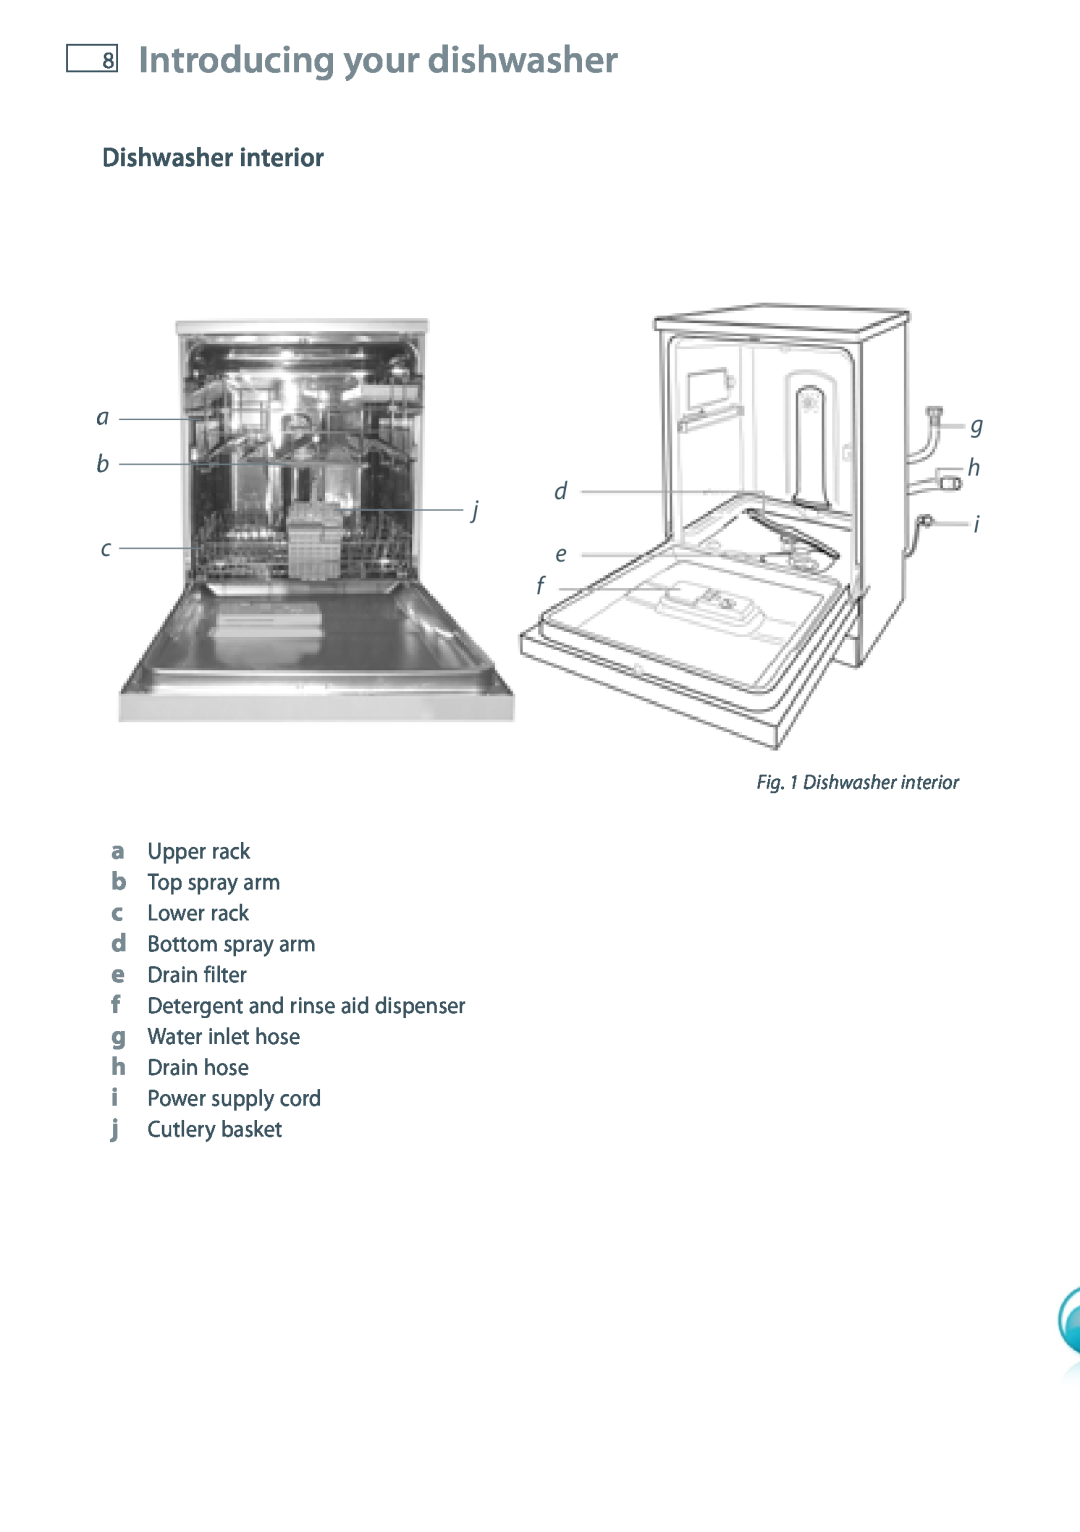 Fisher & Paykel DW60 installation instructions Introducing your dishwasher, Dishwasher interior 